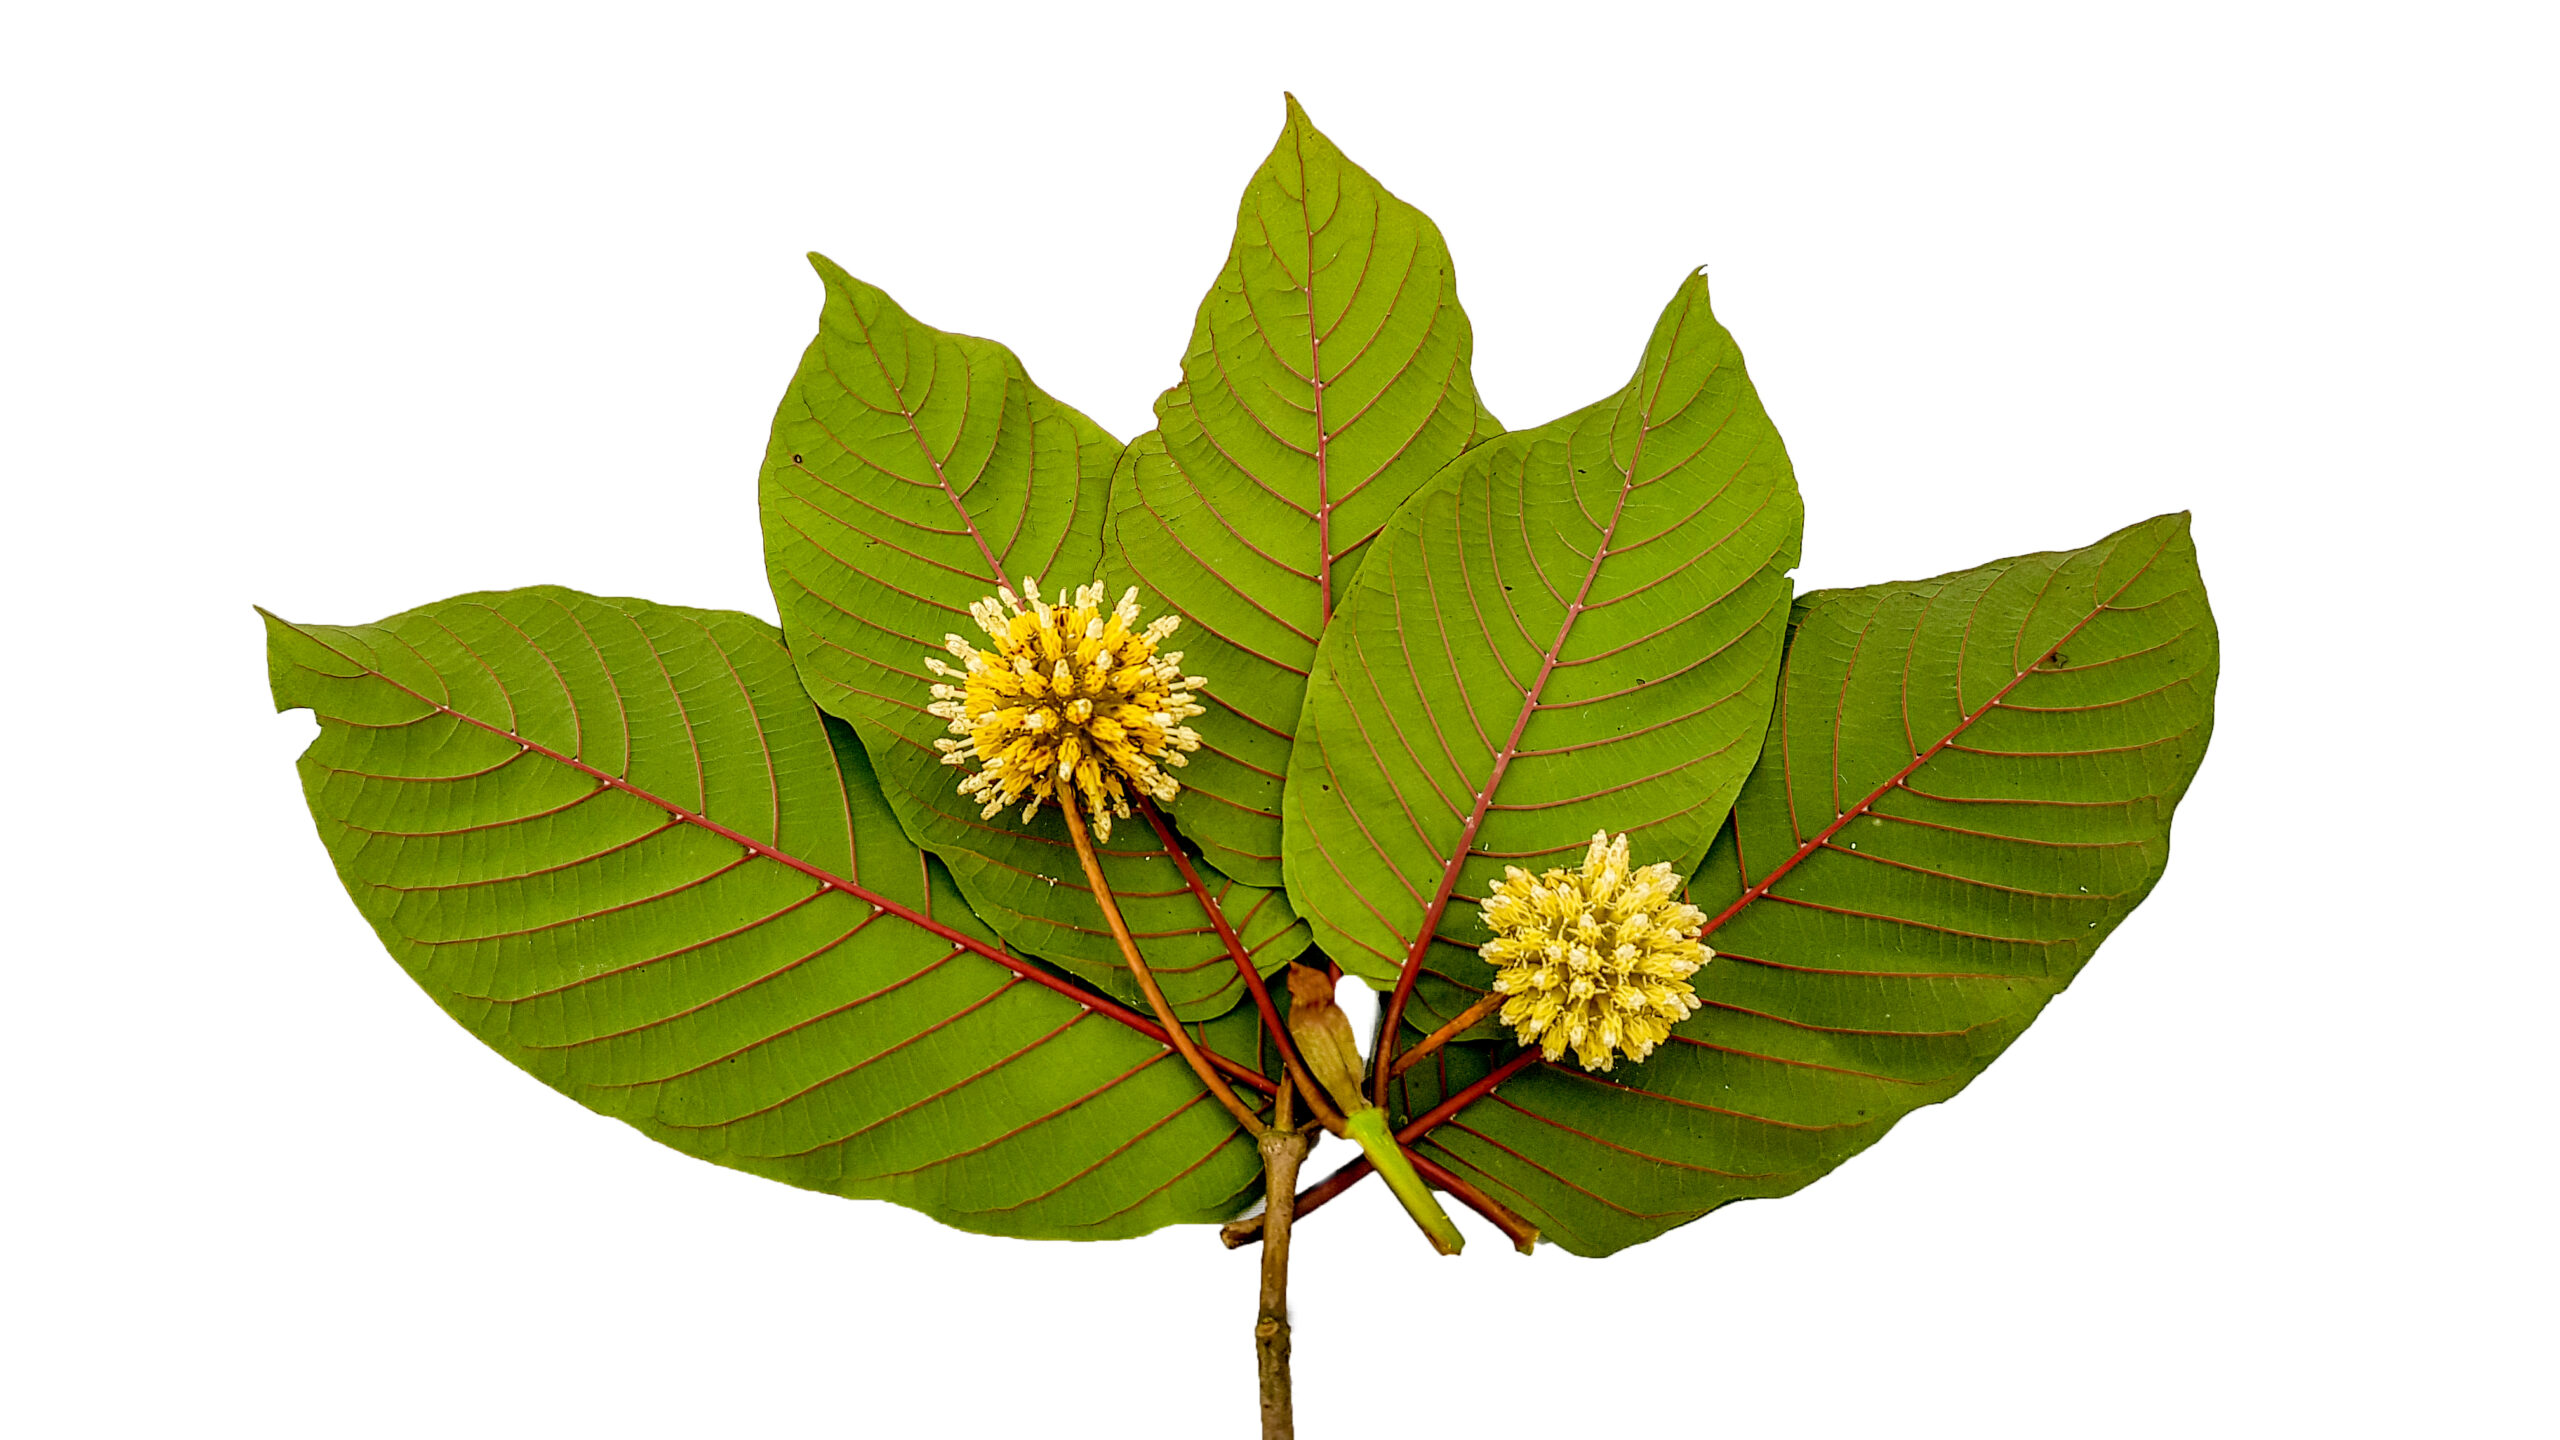 Which is the strongest kratom – Super Green Malay or Maeng Da?